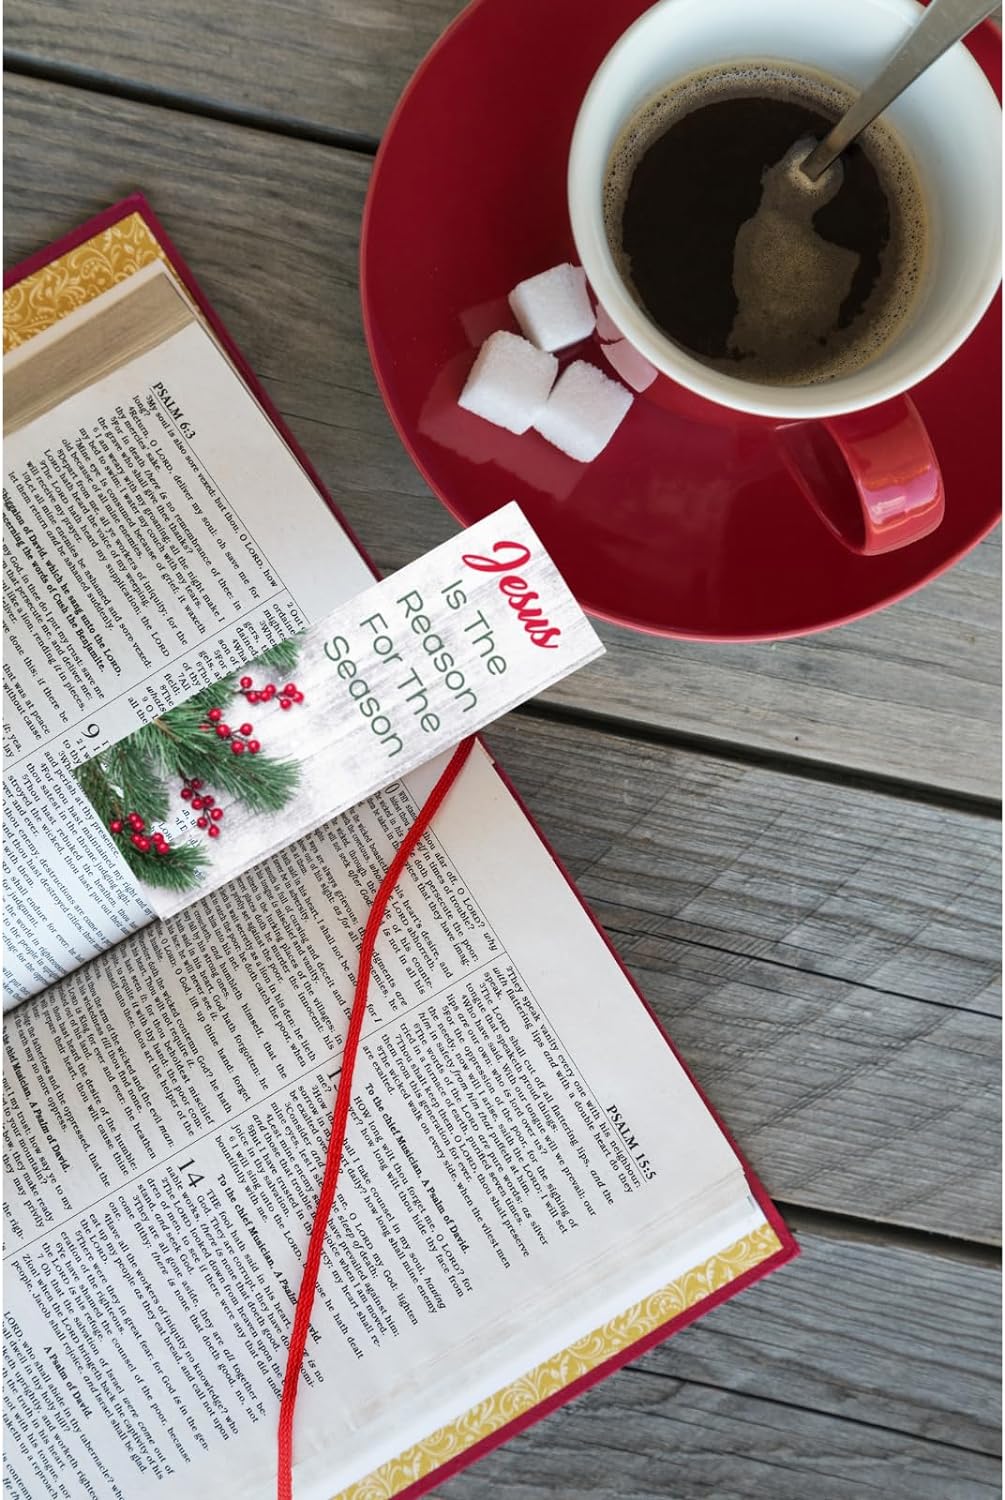 100 Count Bulk Pack - Christmas Jesus is The Reason for The Season Bookmarks - Isaiah 9:6 NIV Bible Verse - Church Handouts- Greeting Card Inserts